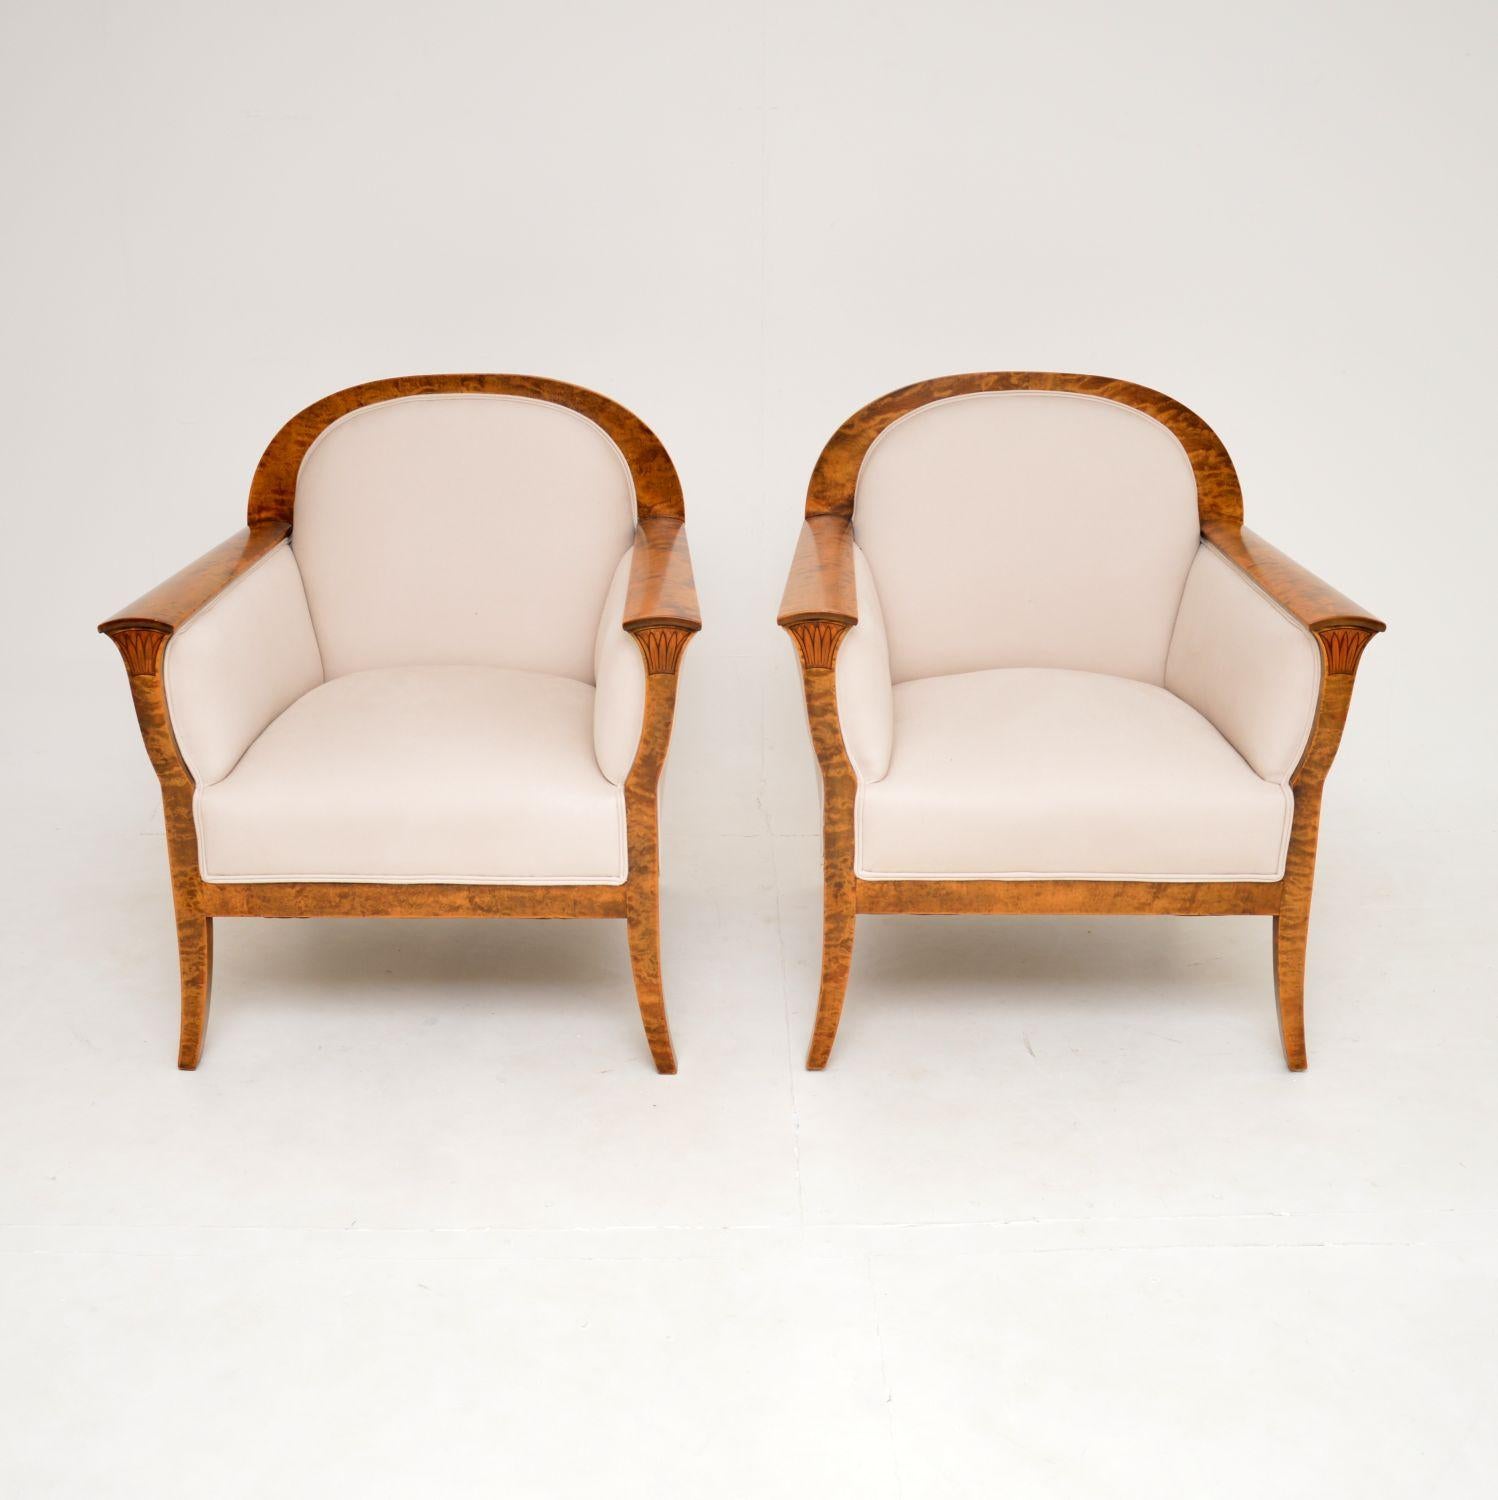 An absolutely stunning pair of antique Swedish armchairs in satin birch. They were recently imported from Sweden, they date from around the 1900-1920 period.

They are of amazing quality and are extremely stylish; they are very well built and very